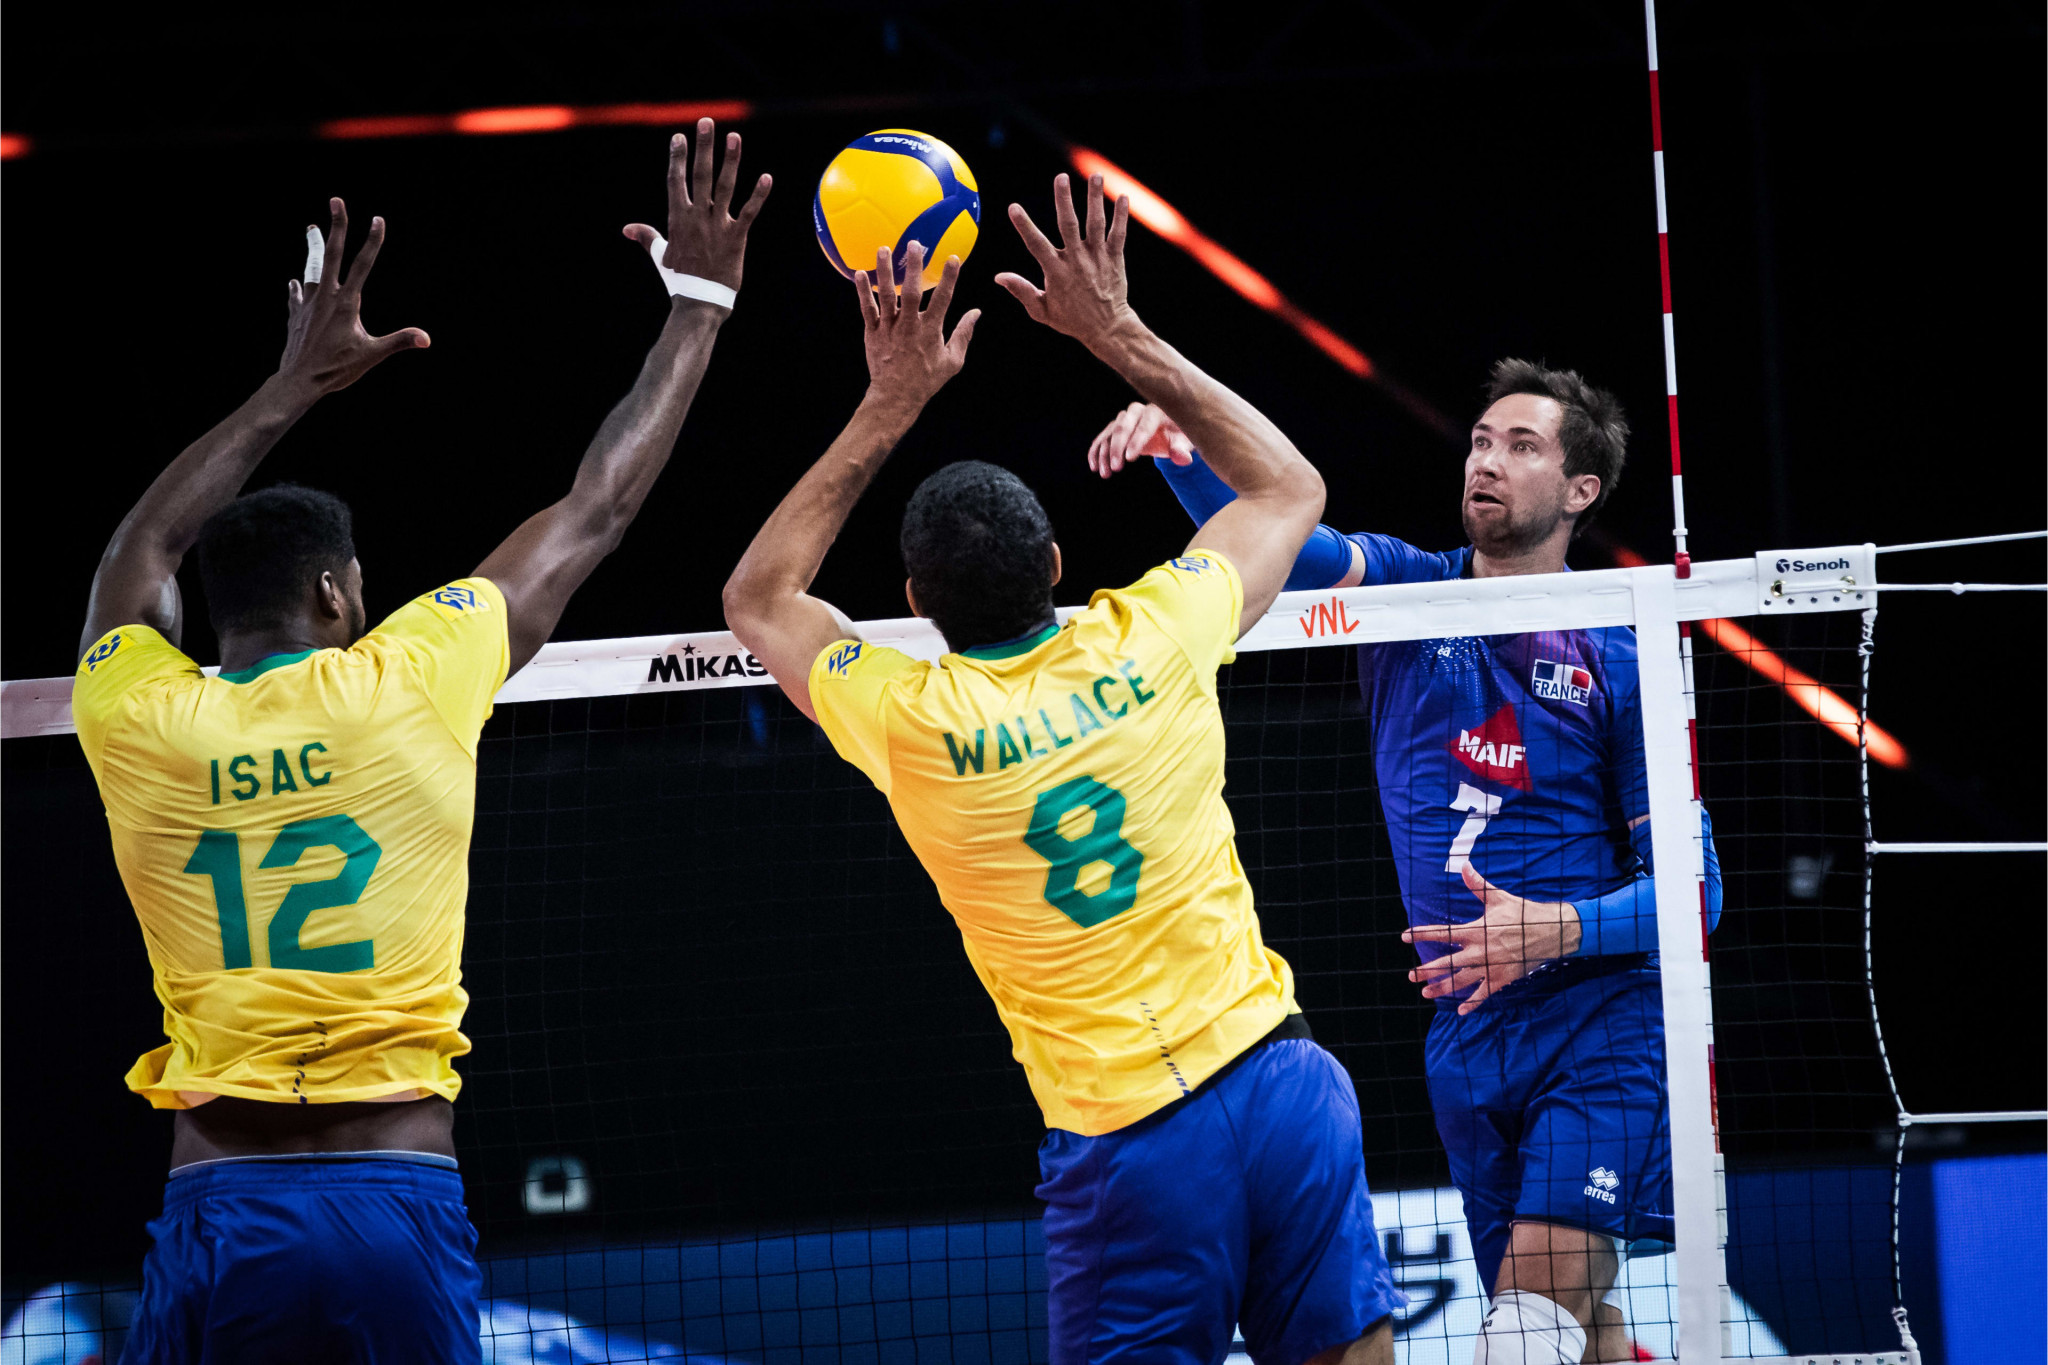 Brazil lead mens Volleyball Nations League after third week of matches